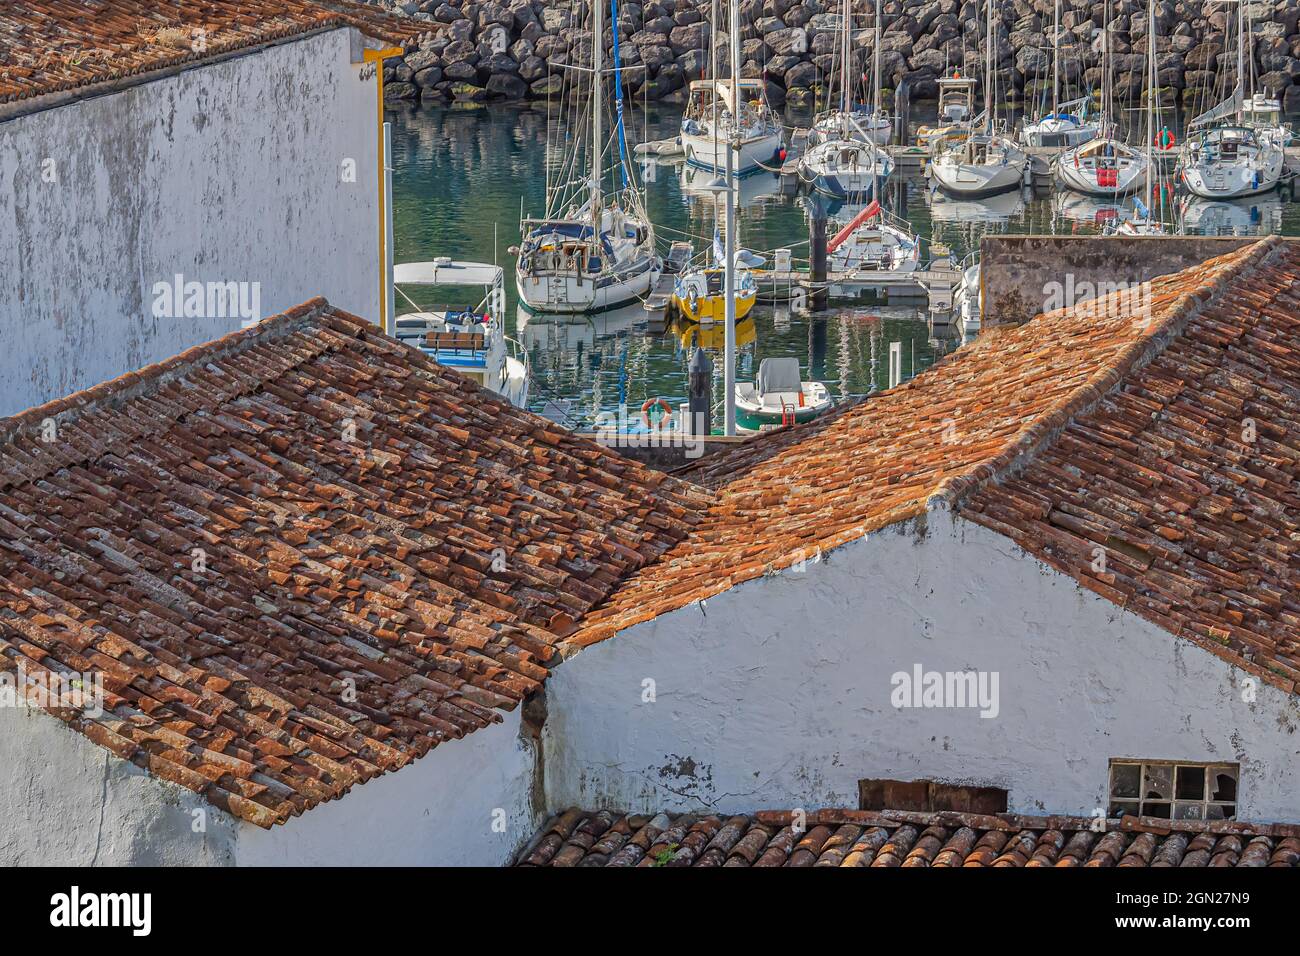 Sailboats in a sheltered marina are visible beyond red tile rooftops on old buildings in the historic city of Angra do Heroismo, Azores, Portugal. Stock Photo